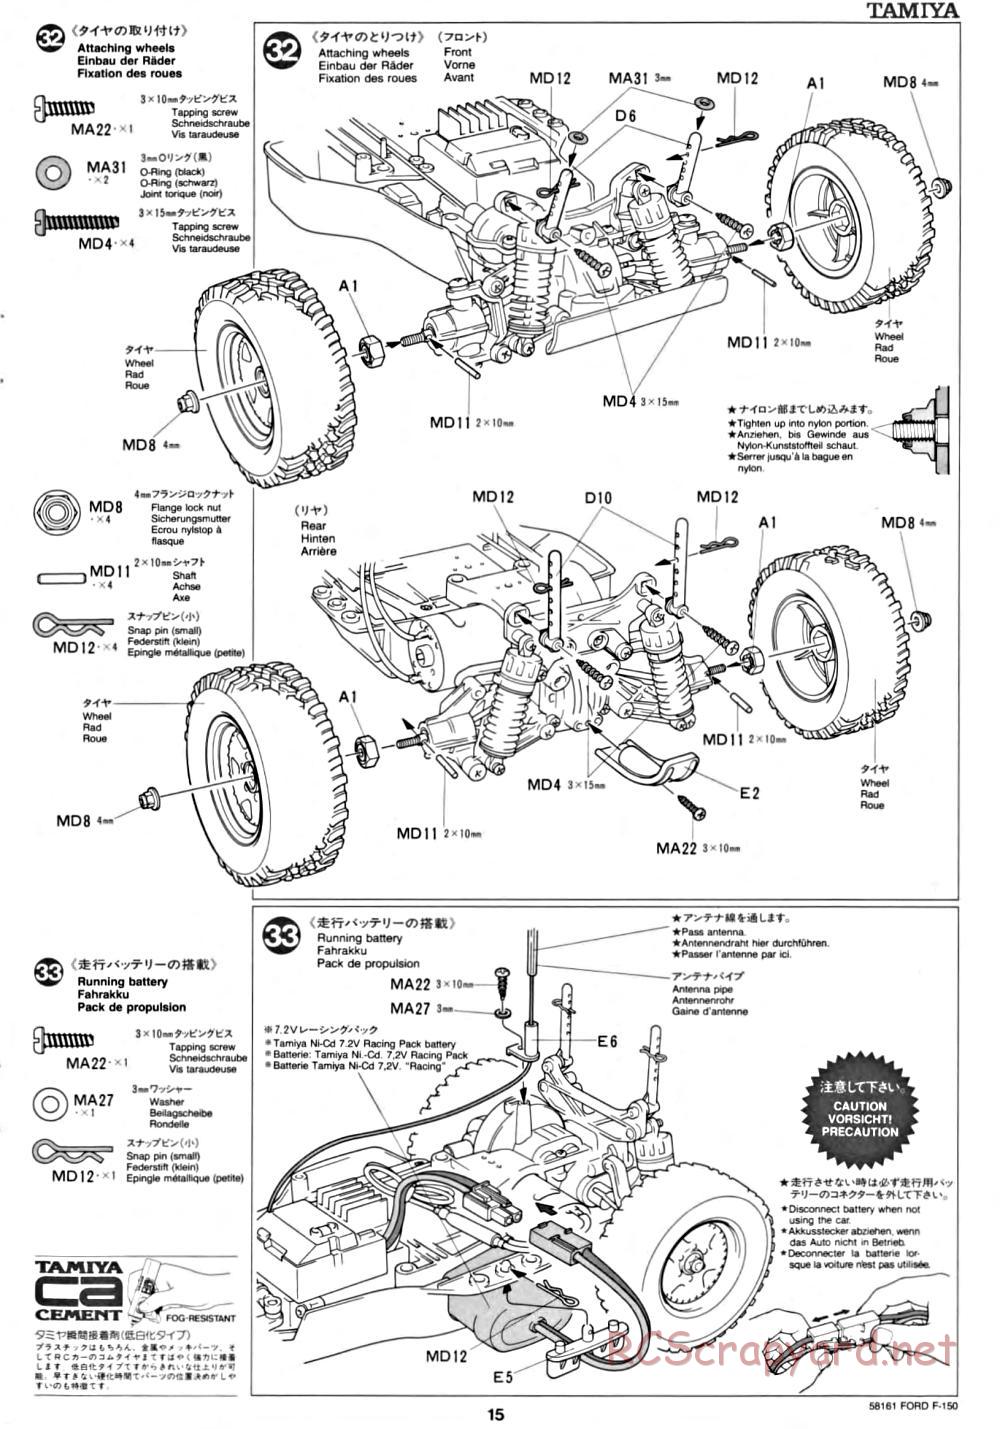 Tamiya - Ford F-150 Truck Chassis - Manual - Page 15